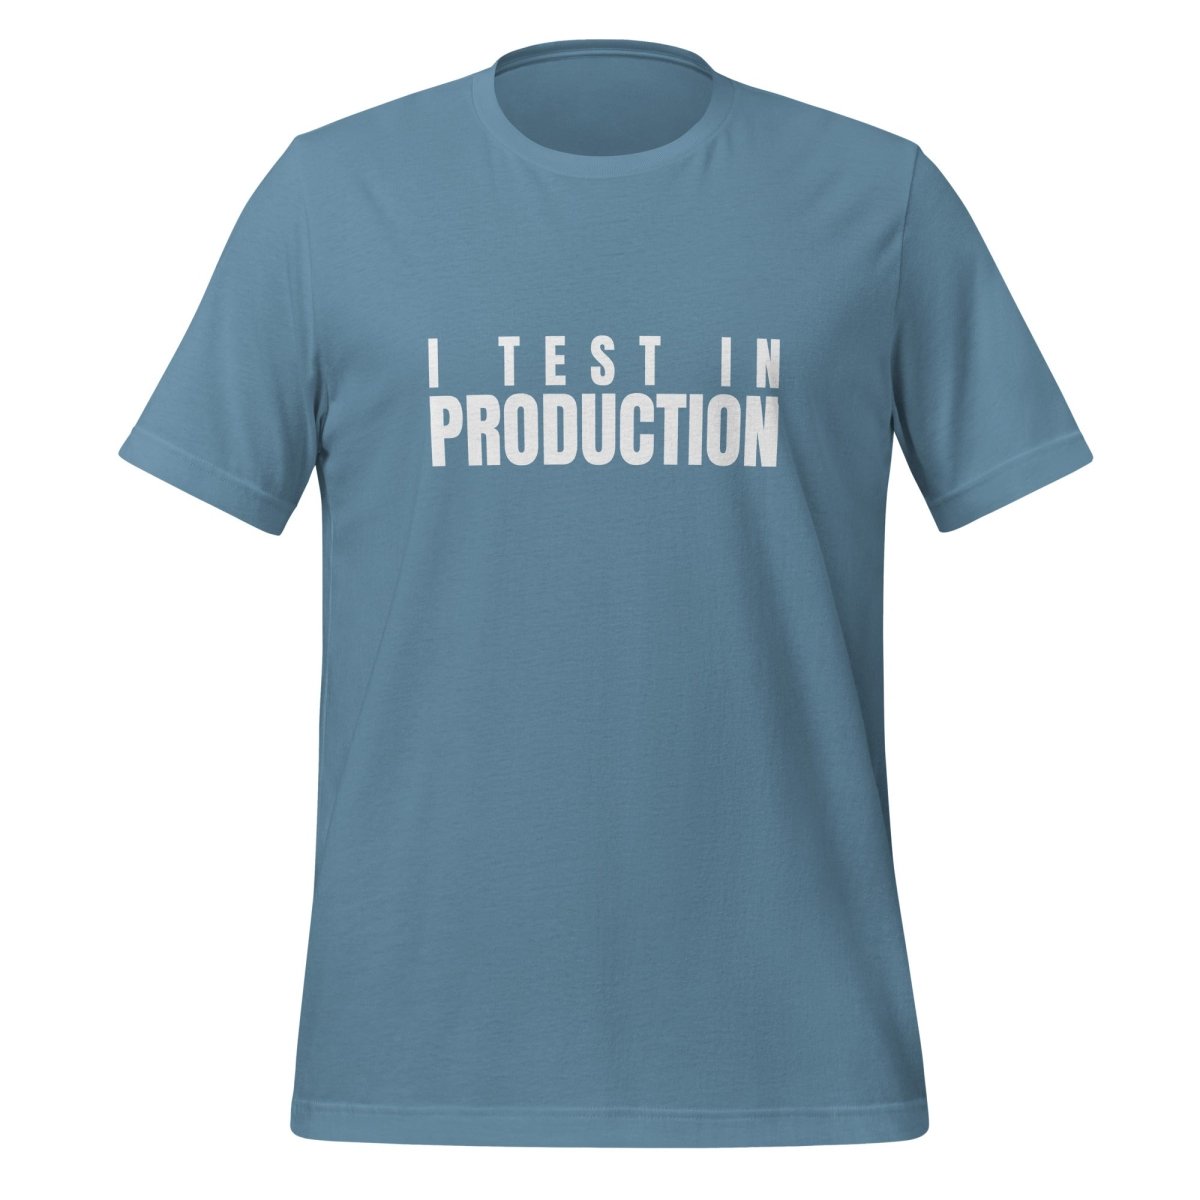 I Test in Production T - Shirt (unisex) - Steel Blue - AI Store